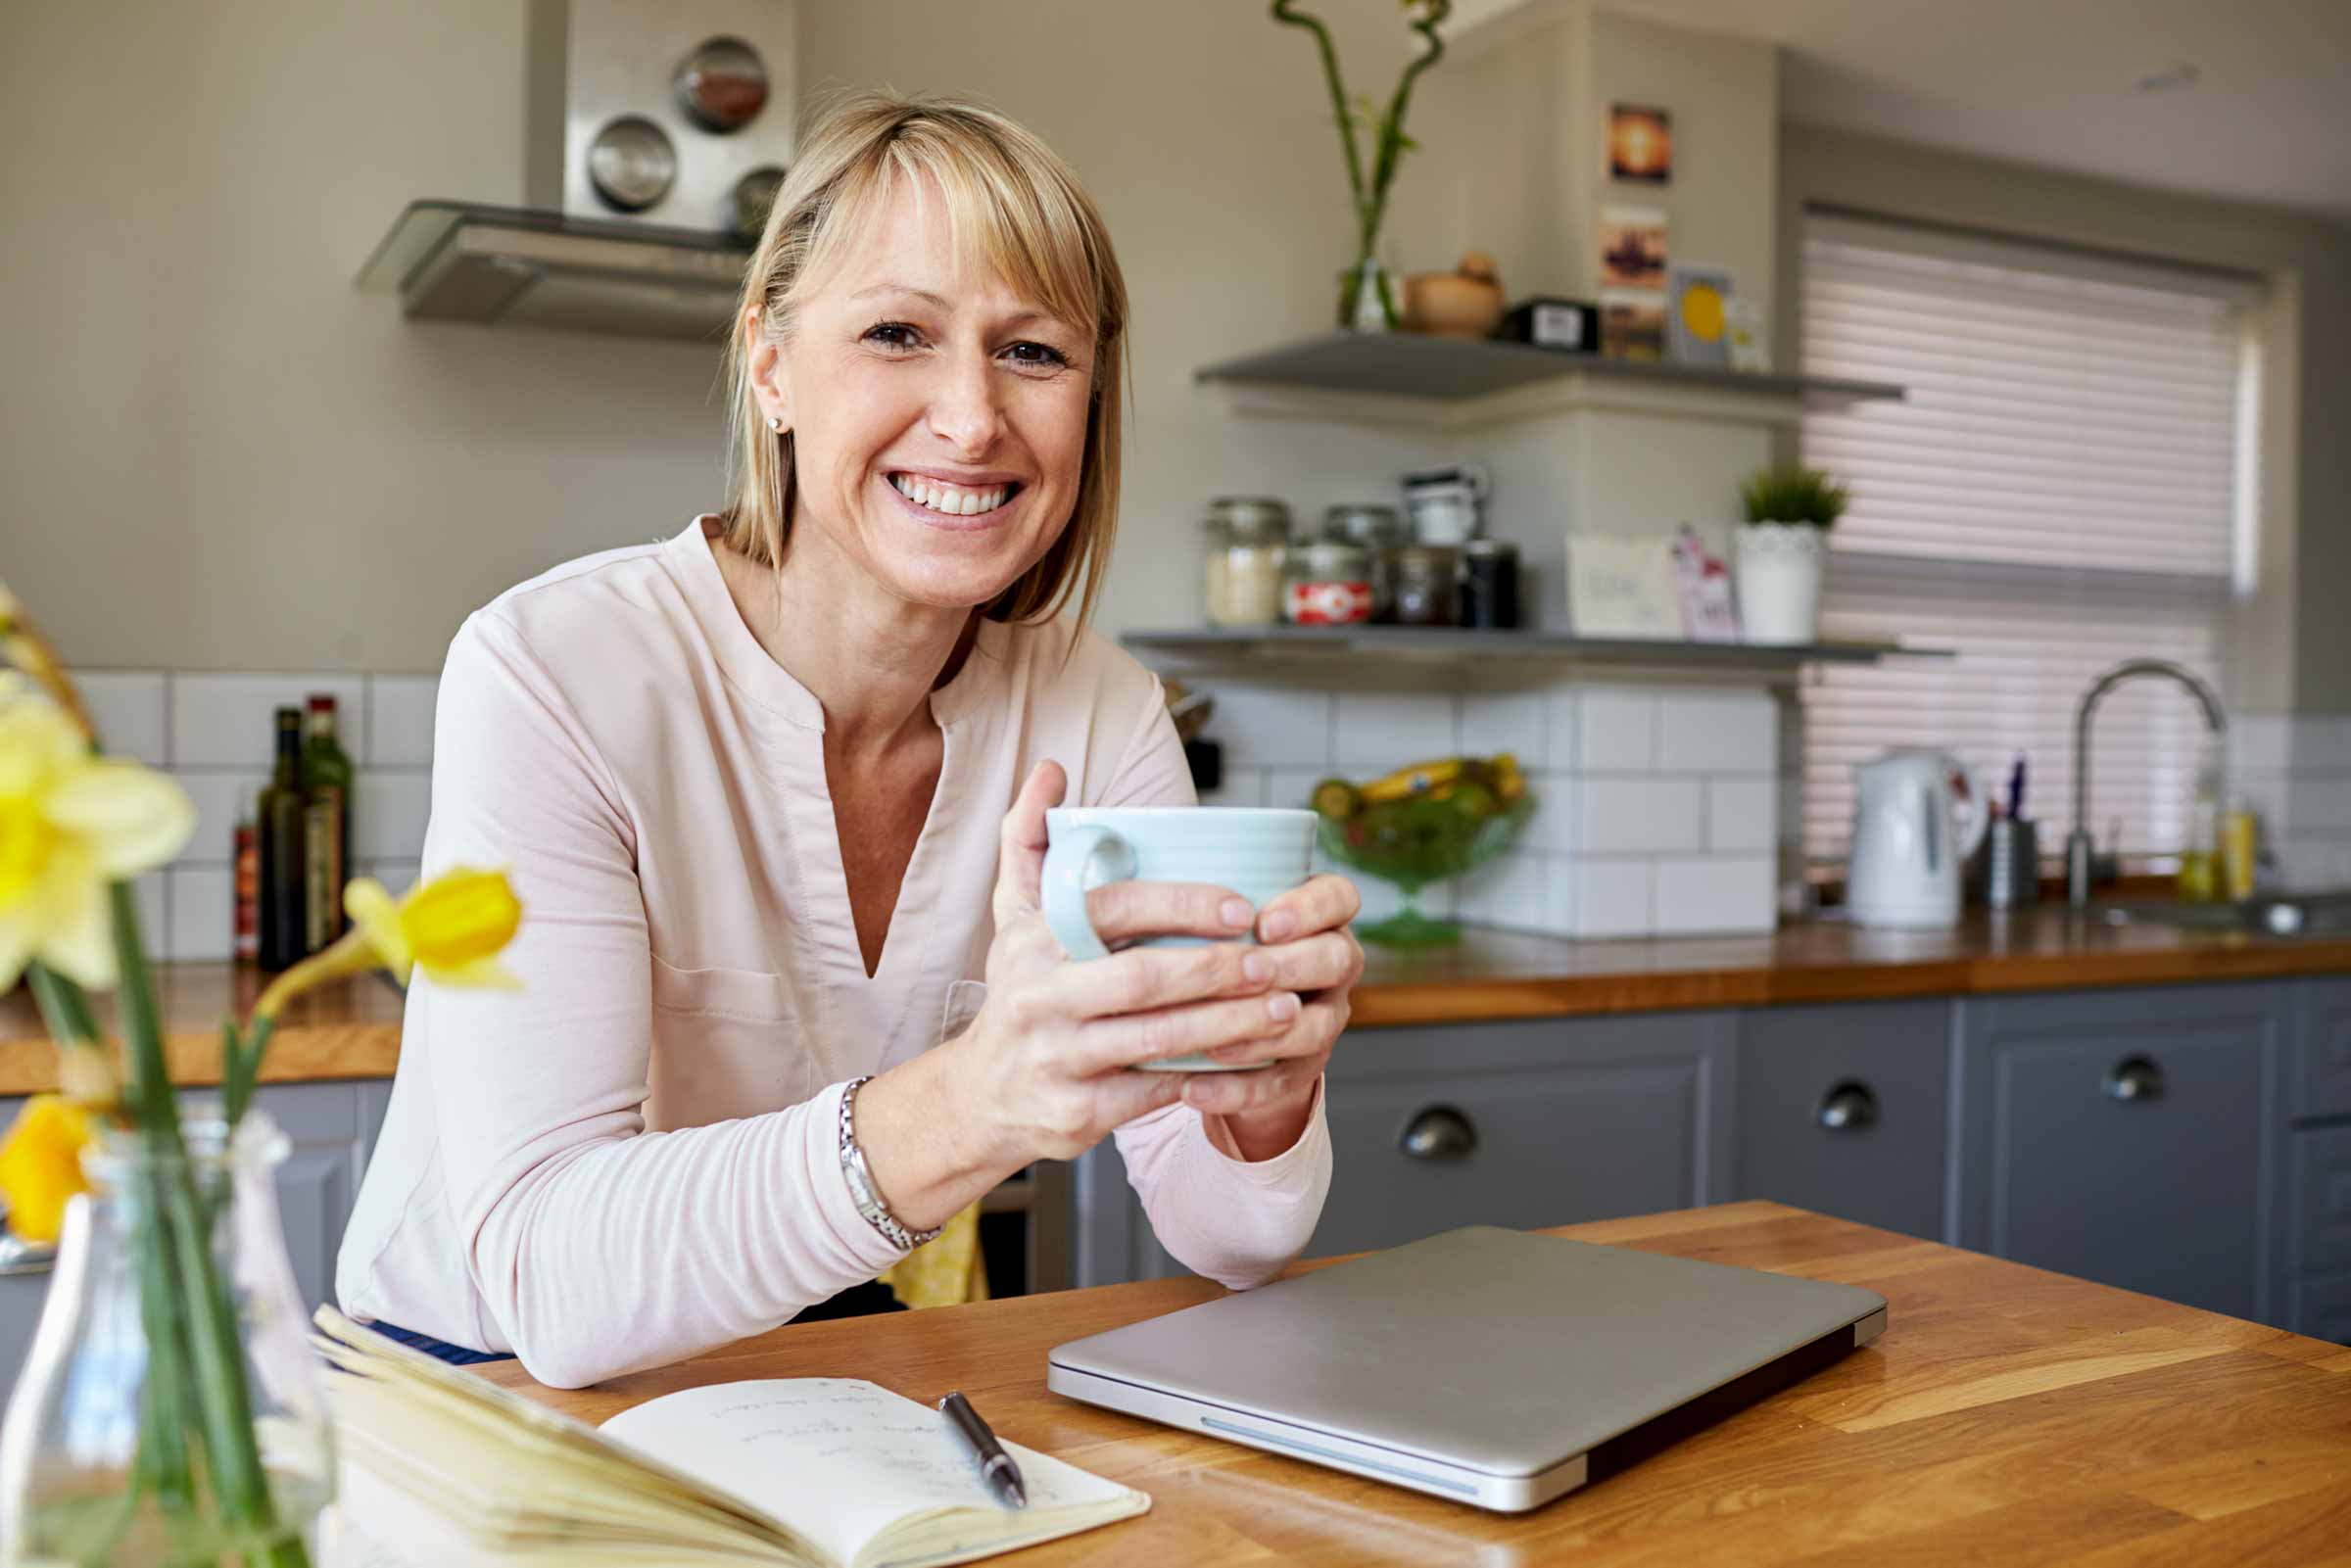 A woman holding a cup of coffee in front of a laptop.